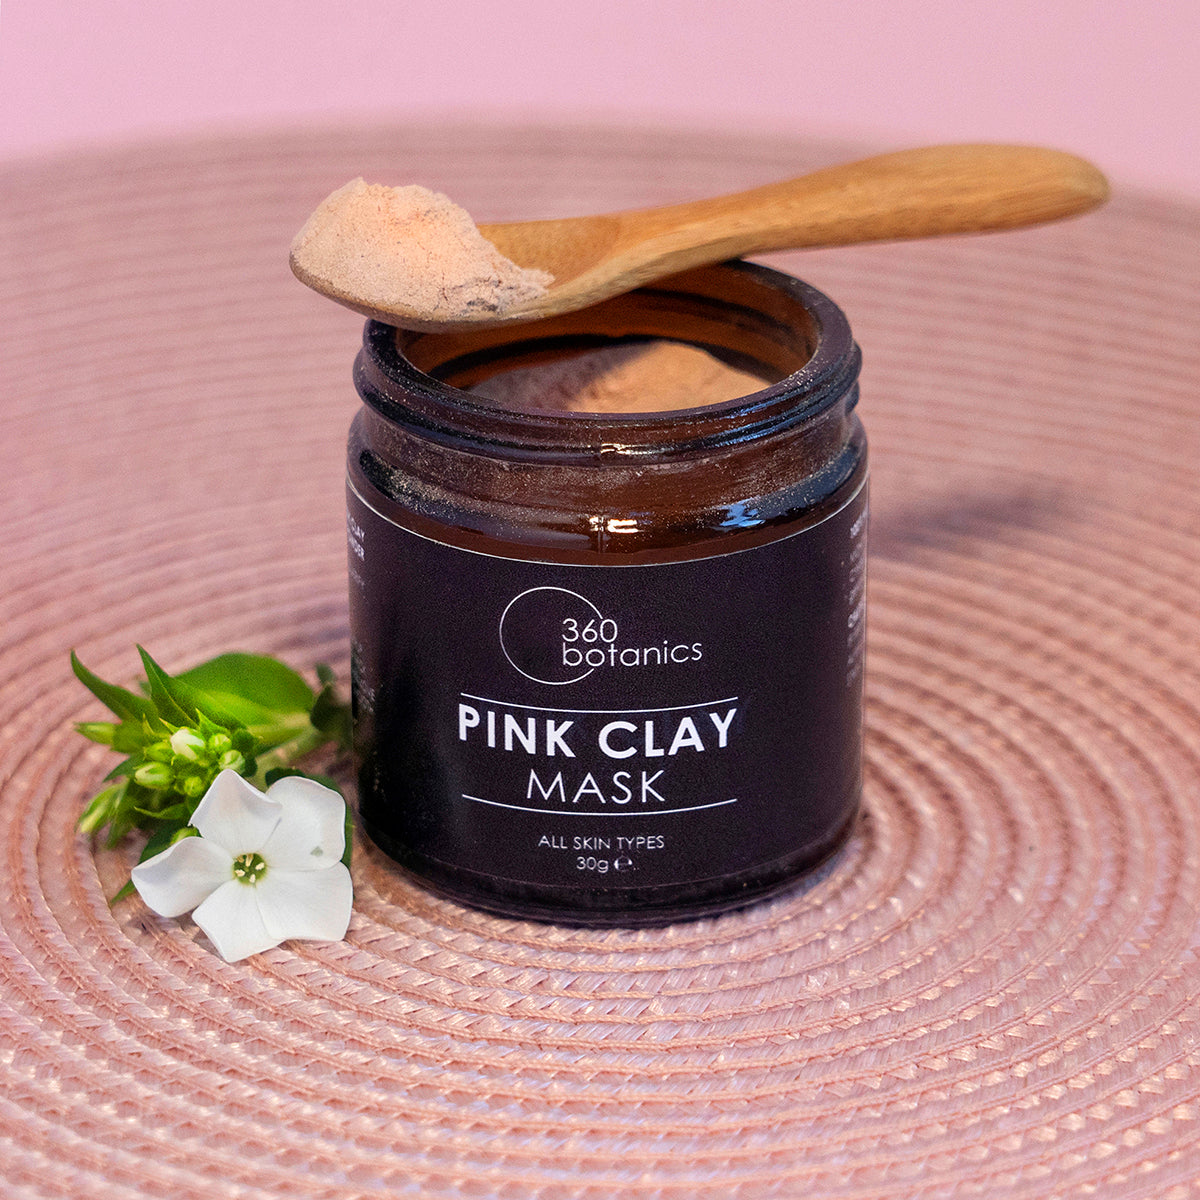 A jar of 360 Botanics Pink Clay Mask open on a woven mat, with a wooden spoon of product on top and a white flower accent, suggesting natural and organic skincare.